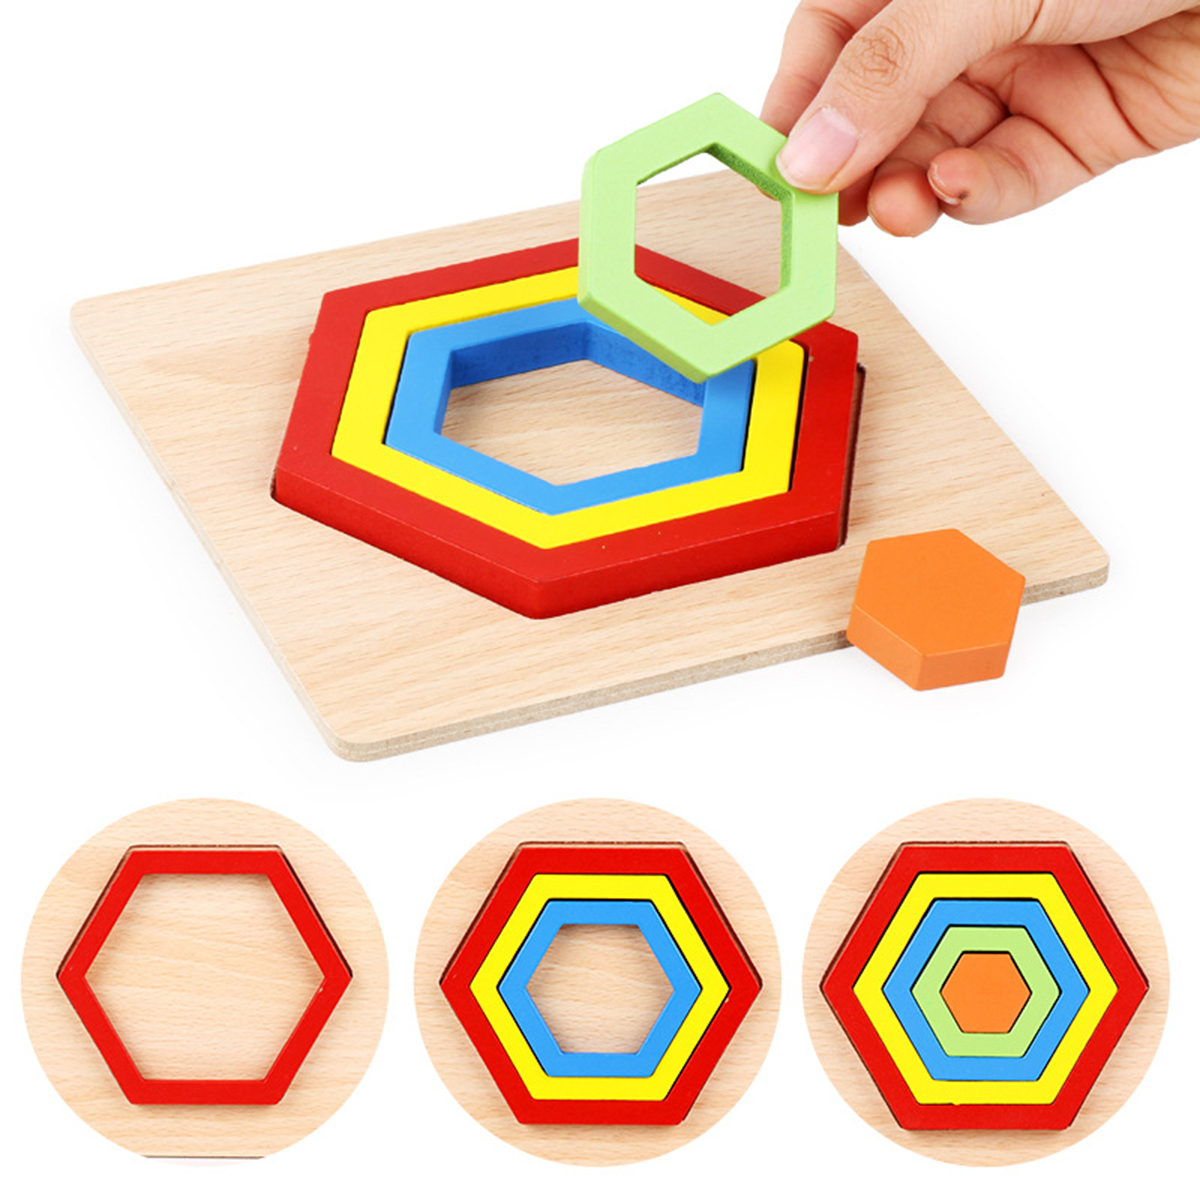 Shape Cognition Board Geometry Jigsaw Puzzle Wooden Kids Educational Learning Toys 16